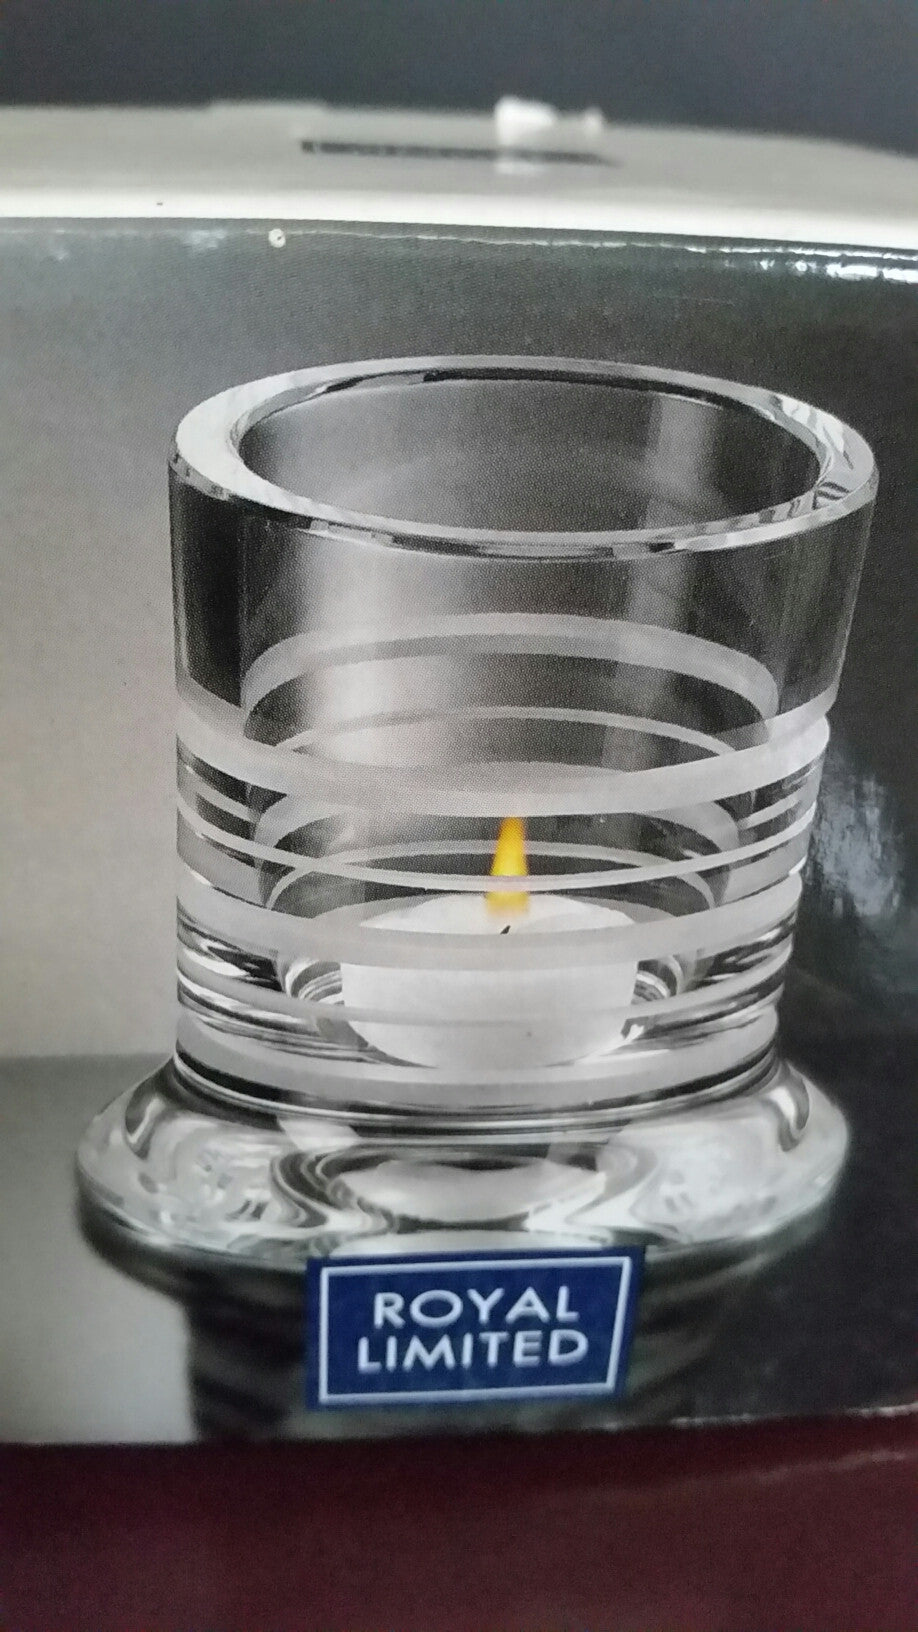 Royal limited crystal votive - O'Rourke crystal awards & gifts abp cut glass